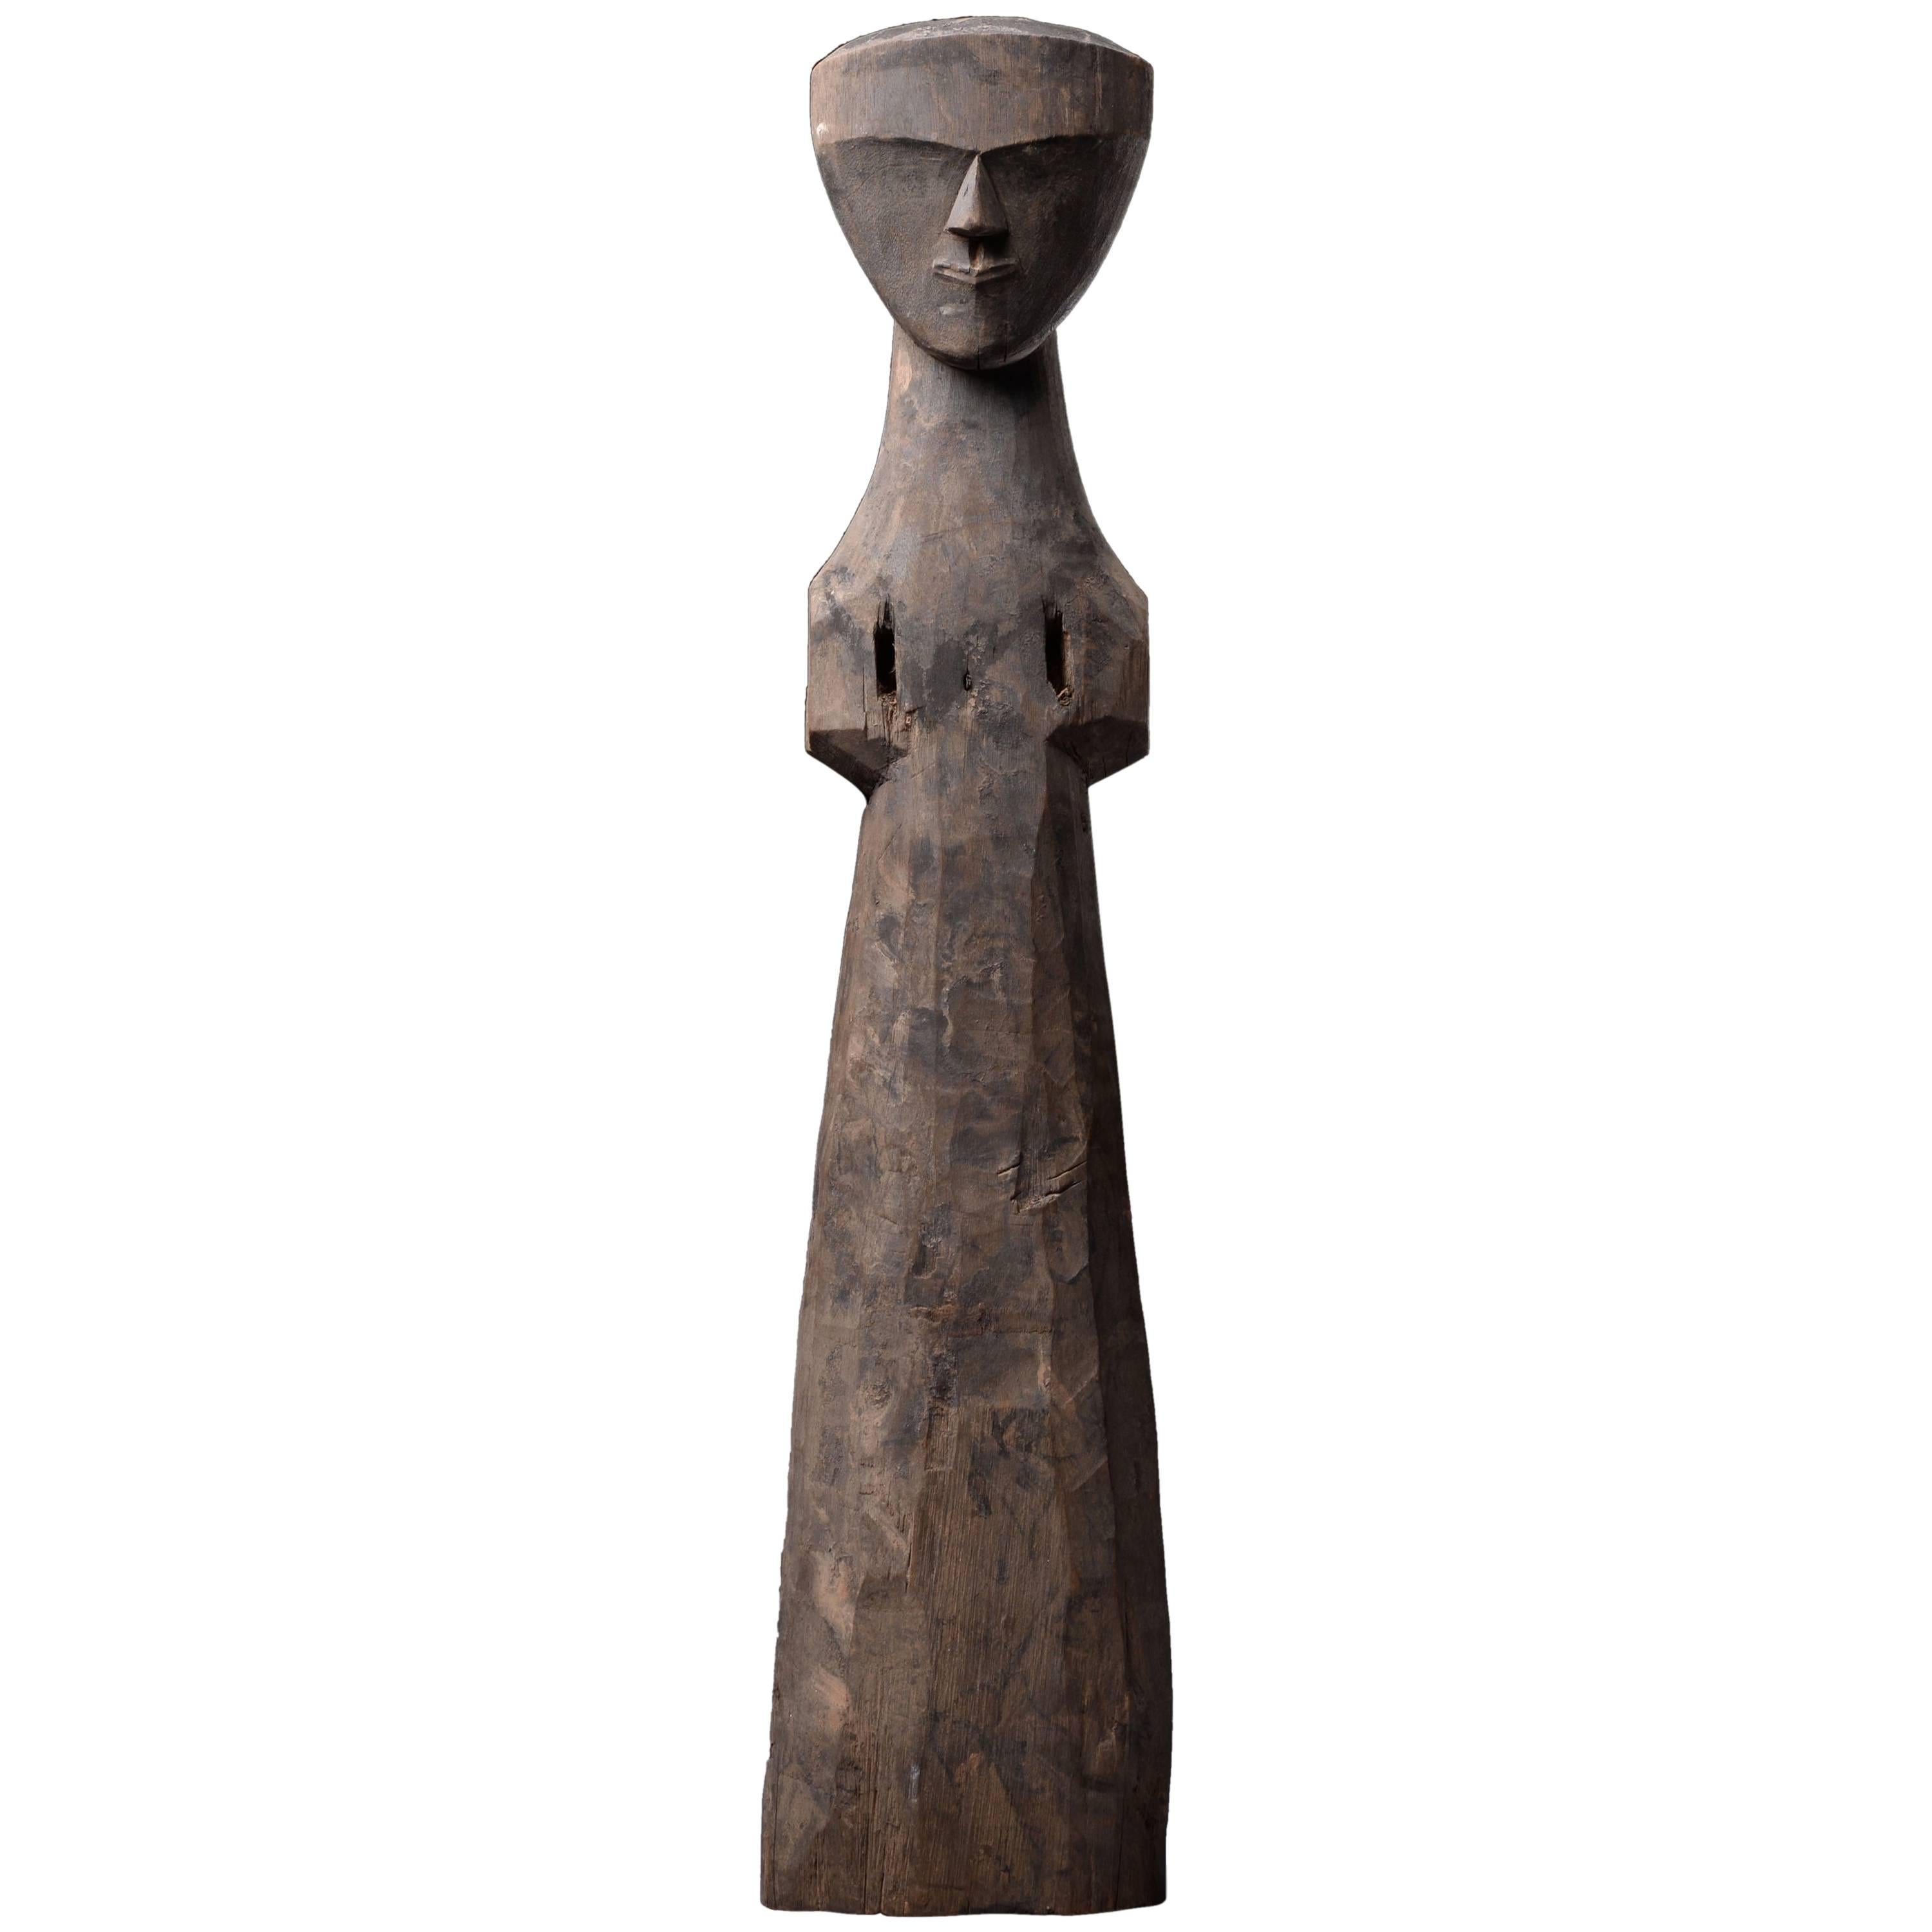 Ancient Chinese Abstract Wooden Spirit Figure Sculpture, 350 BC